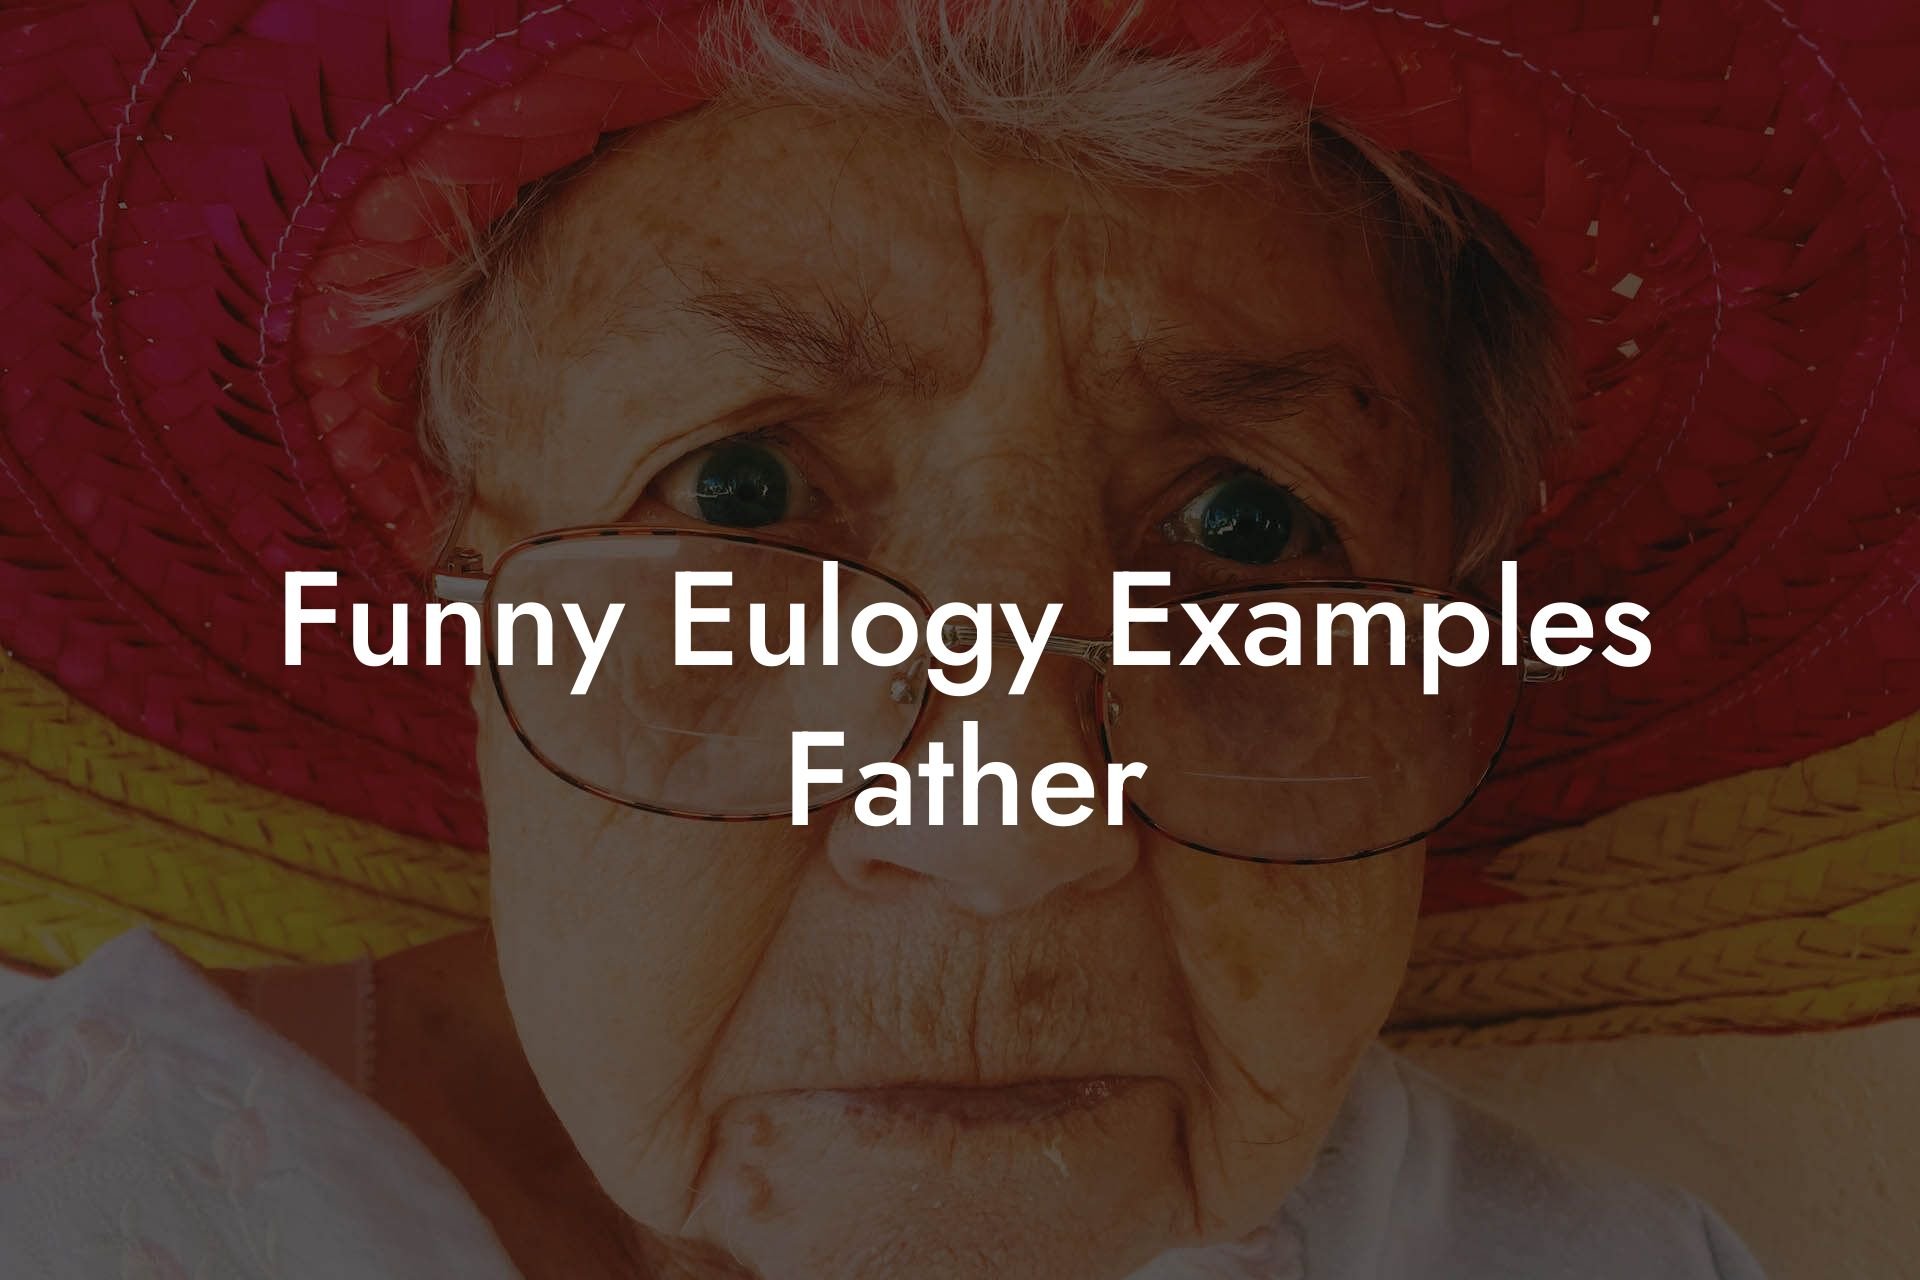 Funny Eulogy Examples Father